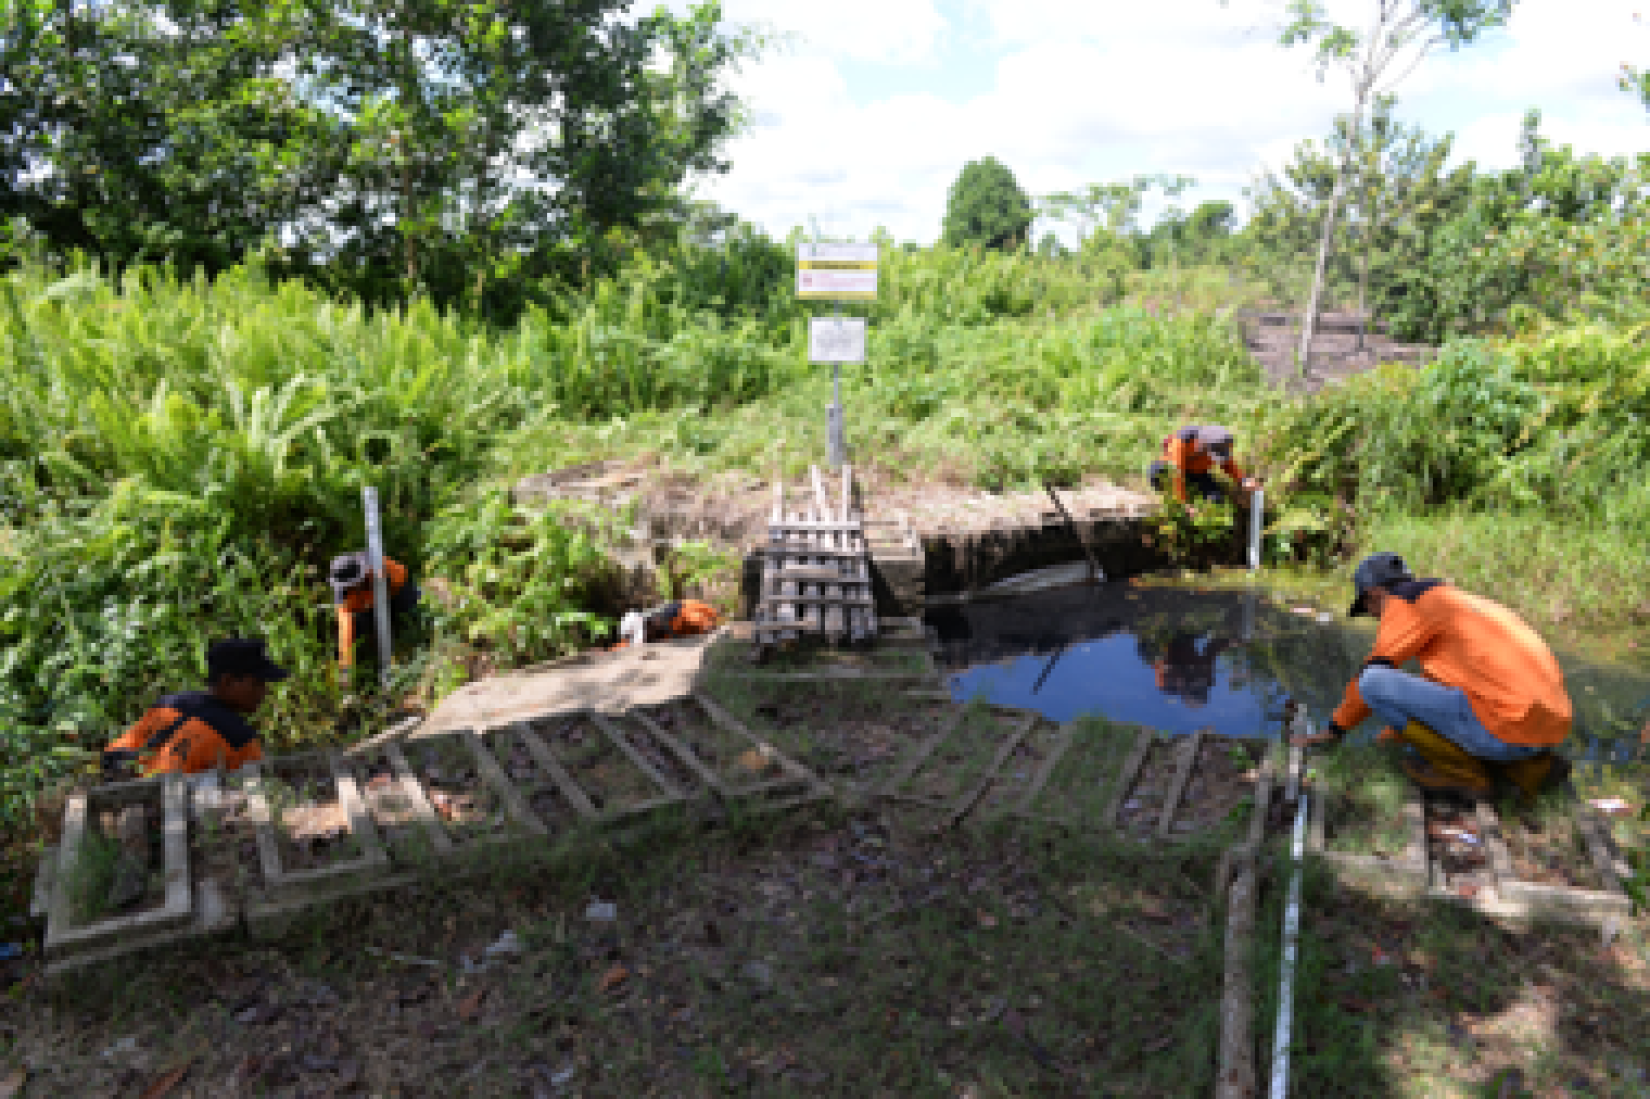 Canal blockers help retain water in peatland areas during the dry season – keeping the land moist. UNOPS helped transfer knowhow and construct this pilot canal blocker; 178 more have since been built by the government.